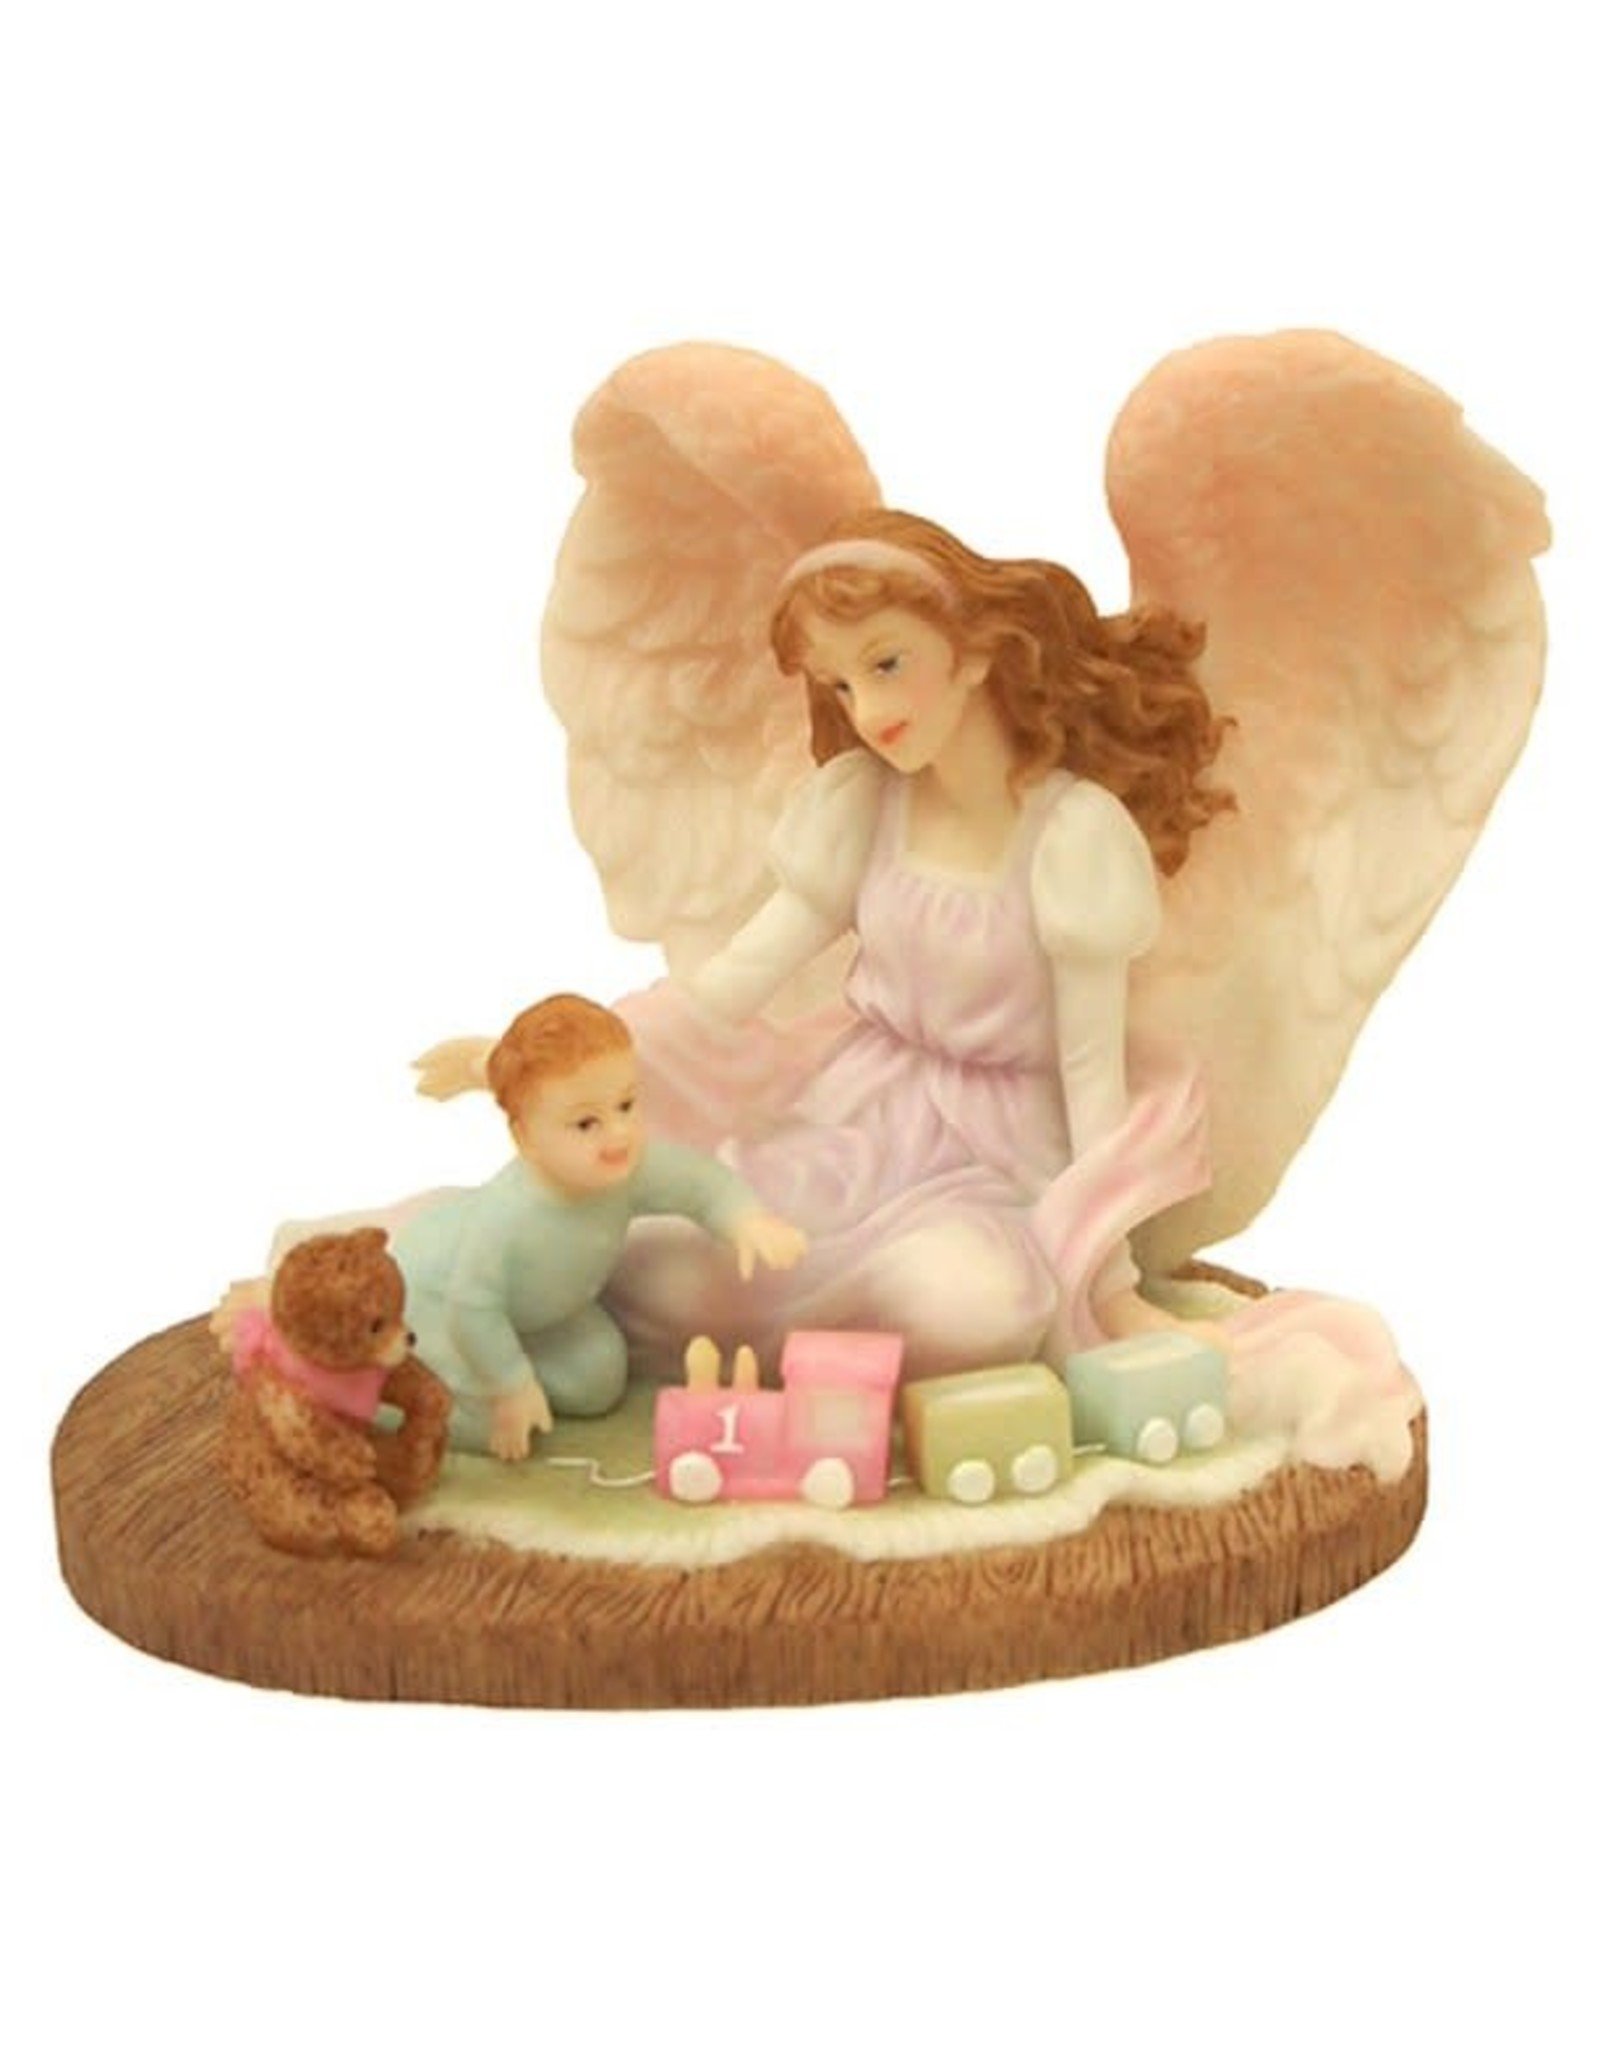 Angels to Watch Over Me, 1-Year Old Boy Figurine